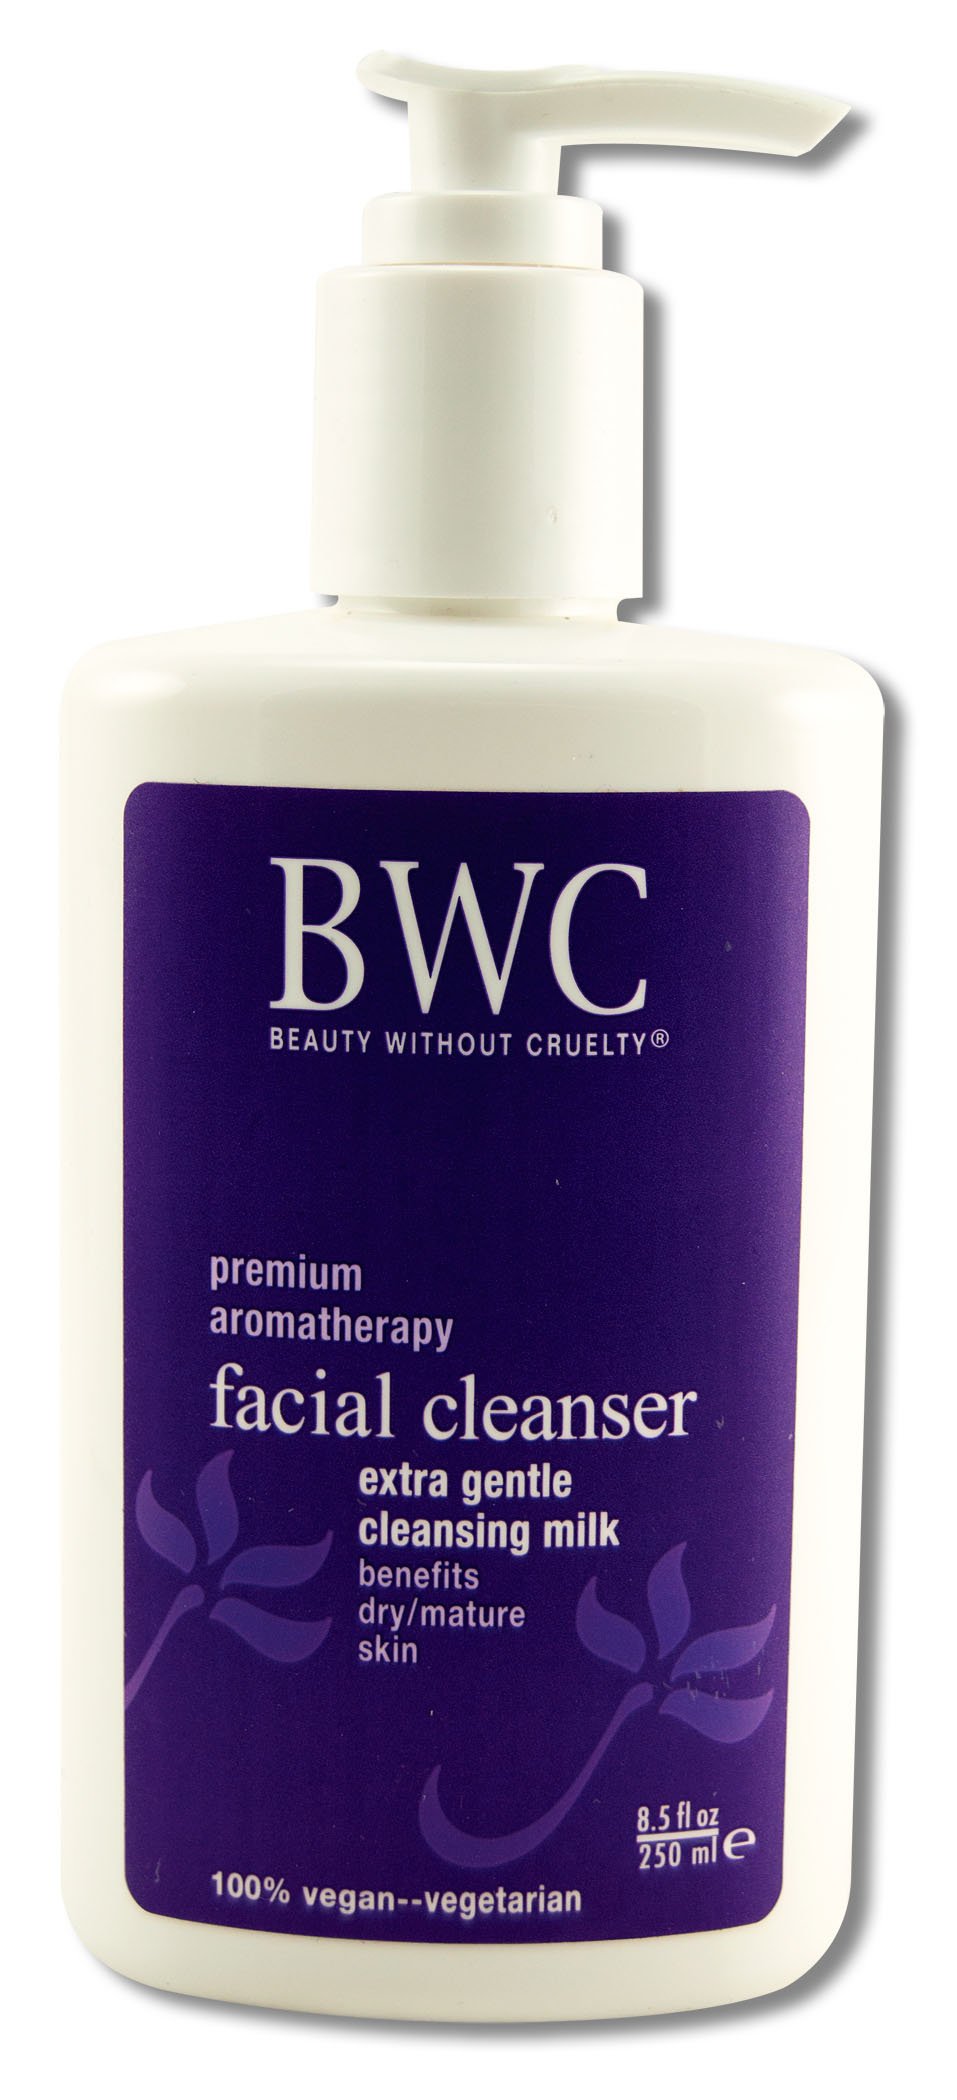 BEAUTY WITHOUT CRUELTY FACIAL CLEANSING MILK, 8.5 FZ